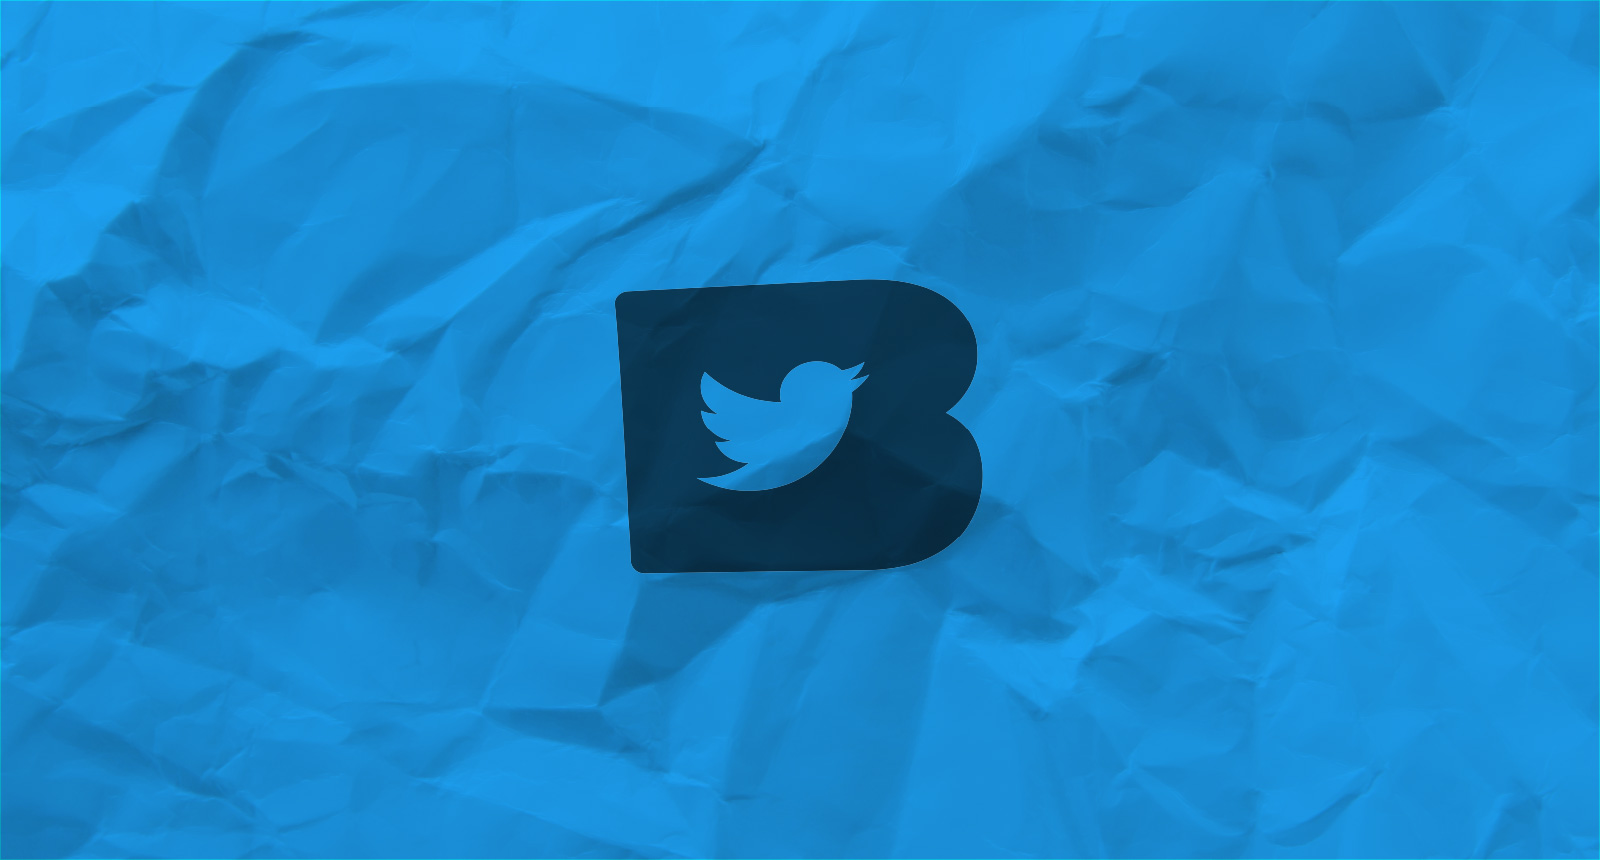 Blue Twitter logo on crumpled paper